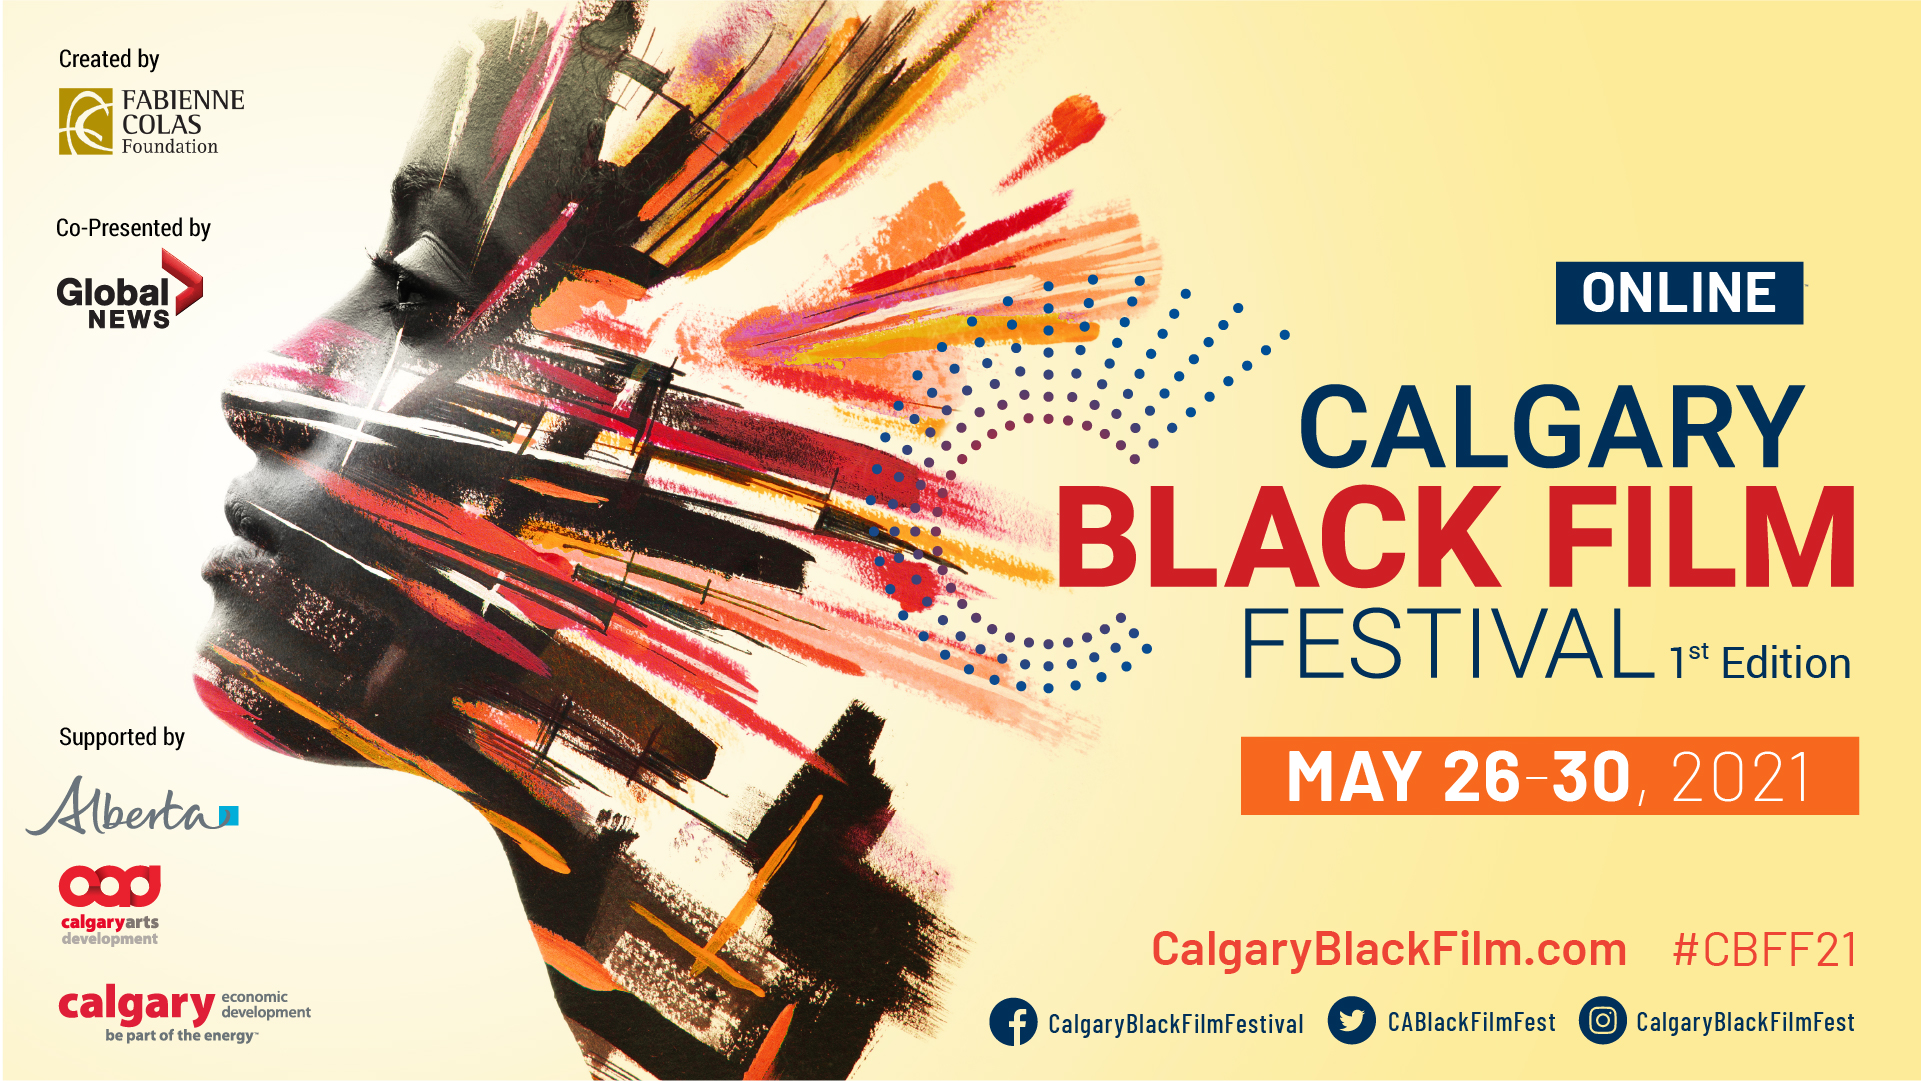 Inaugural CALGARY BLACK FILM FESTIVAL: 41 FILMS FROM 10 COUNTRIES!